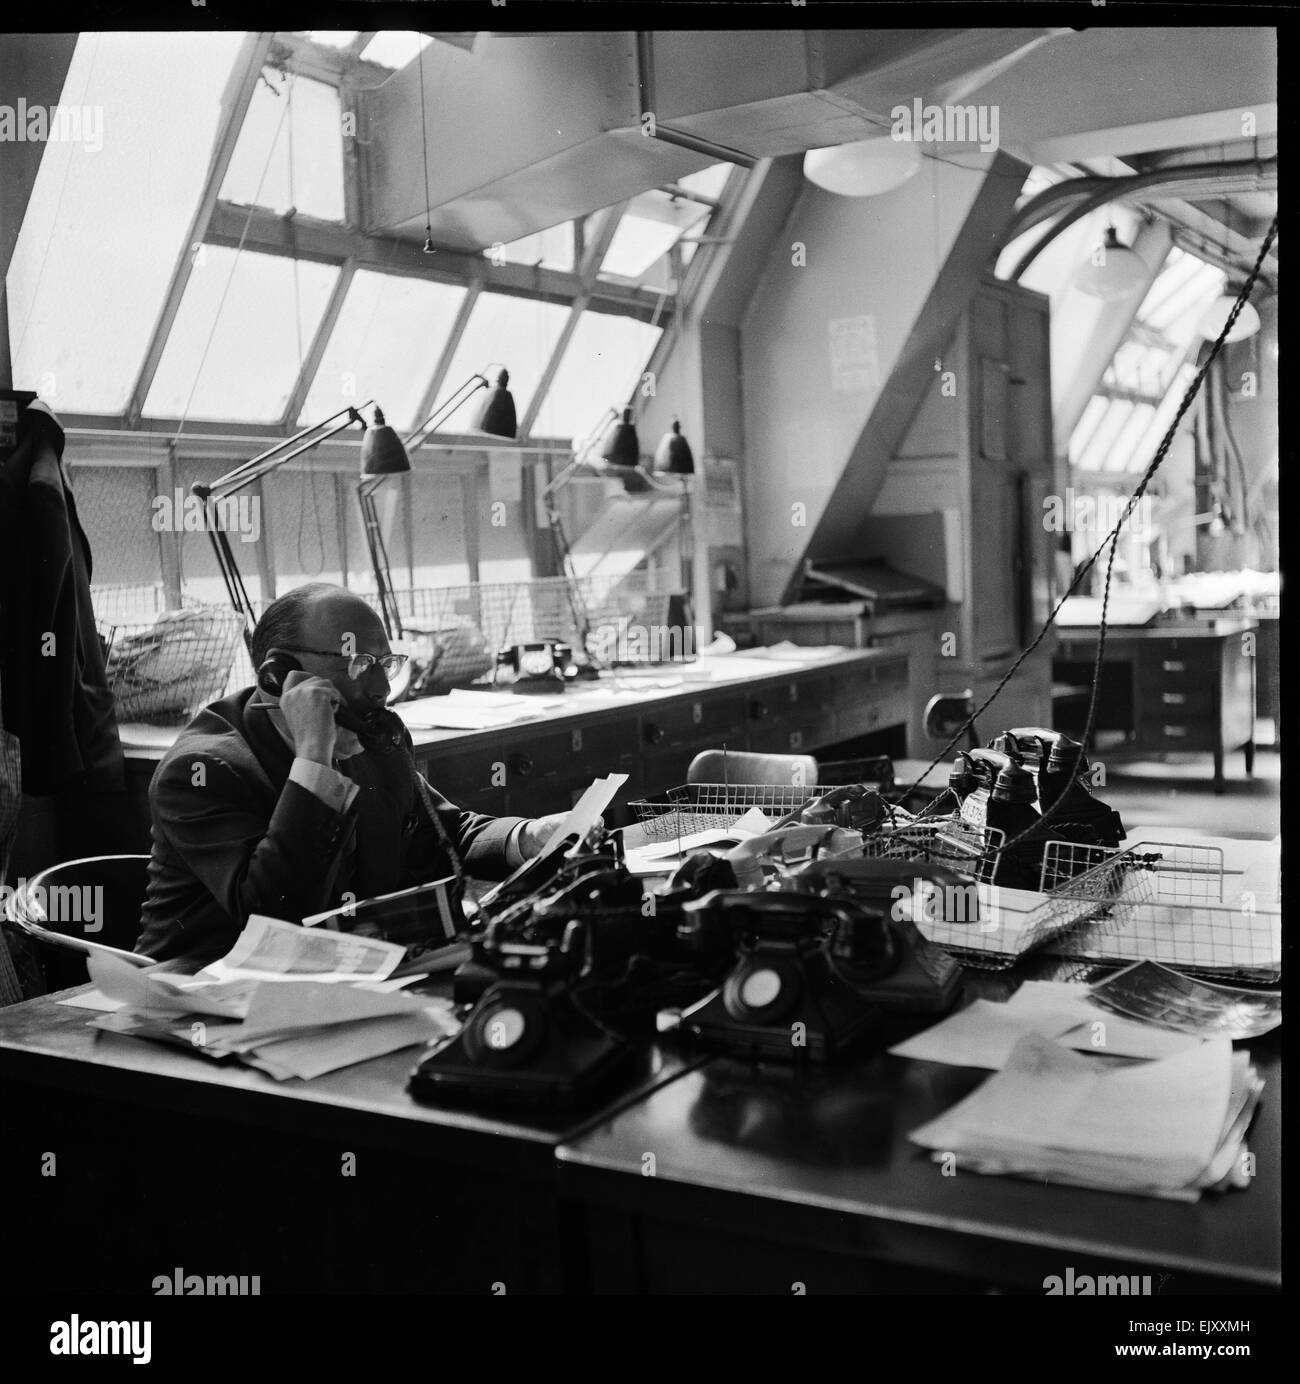 Daily Mirror Picture Desk 23rd March 1956 Stock Photo 80496993